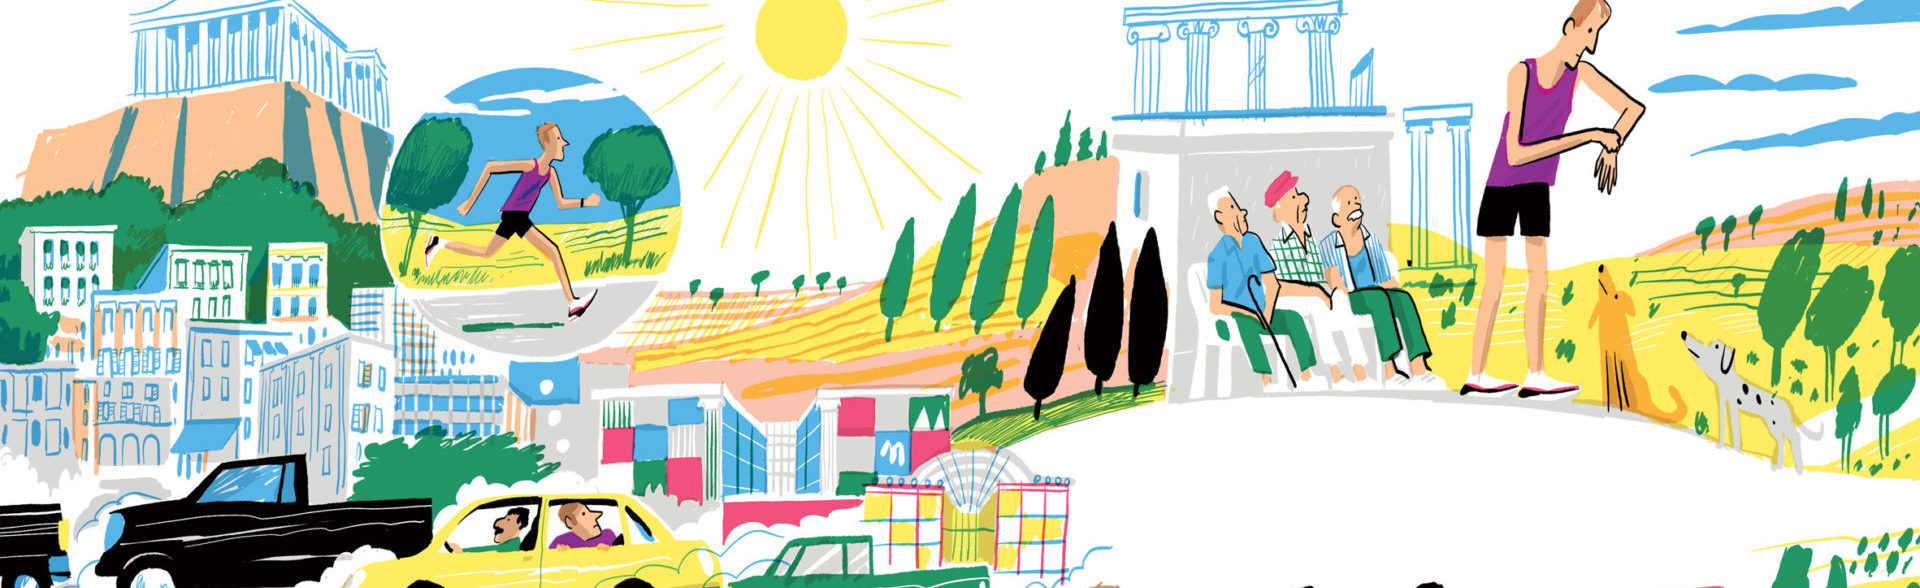 An illustration depicting stages of the Athens Marathon.